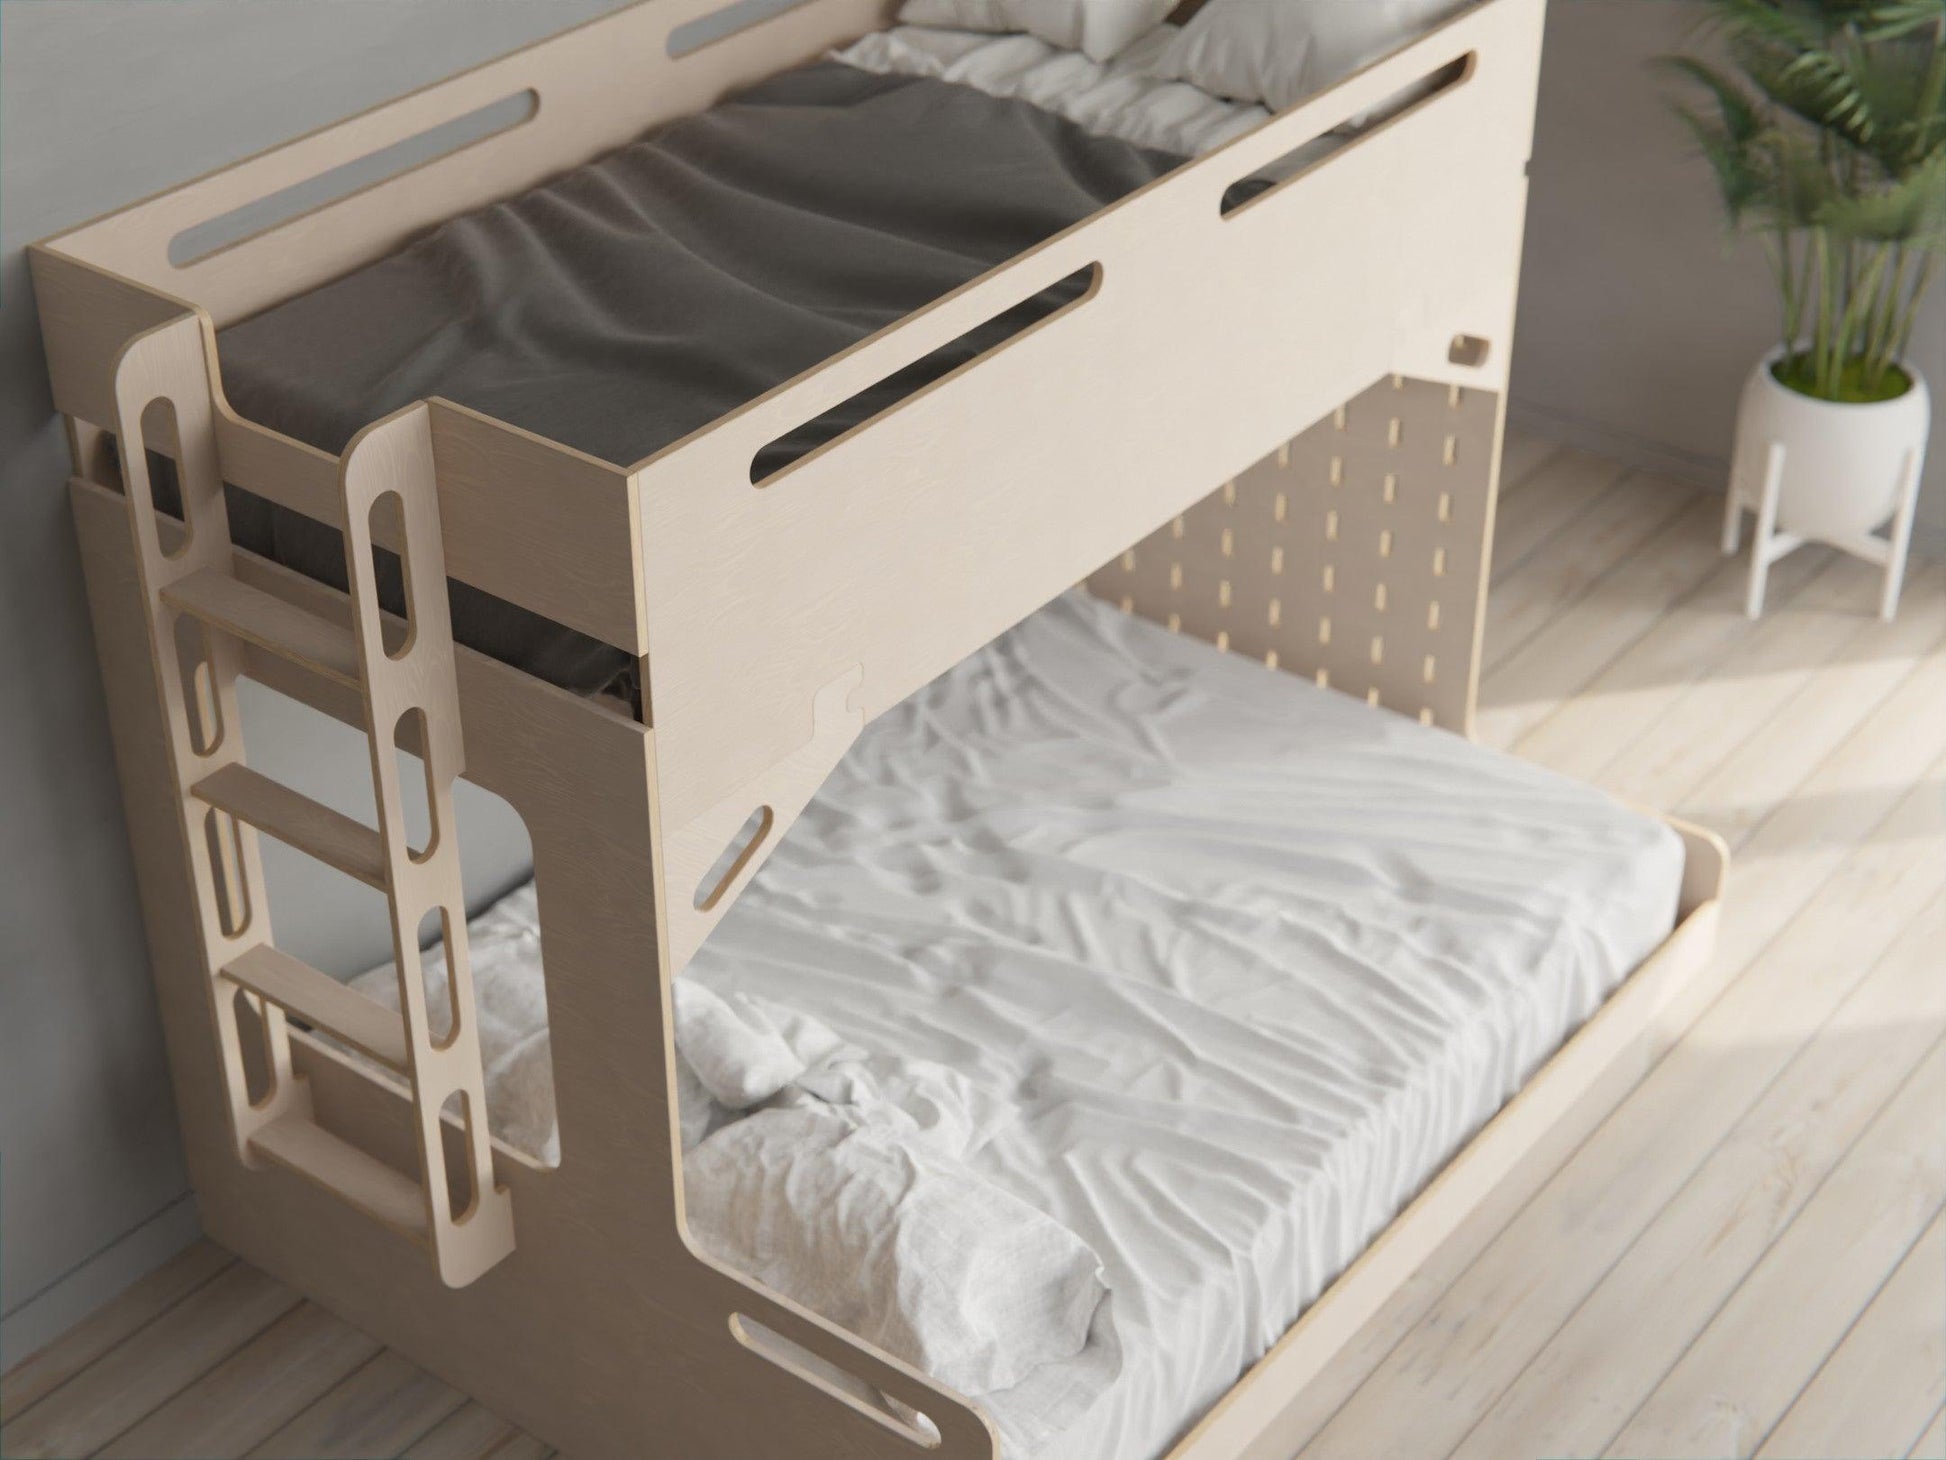 Transform your room with our plywood triple bunk beds. A stylish, space-saving solution for large families.